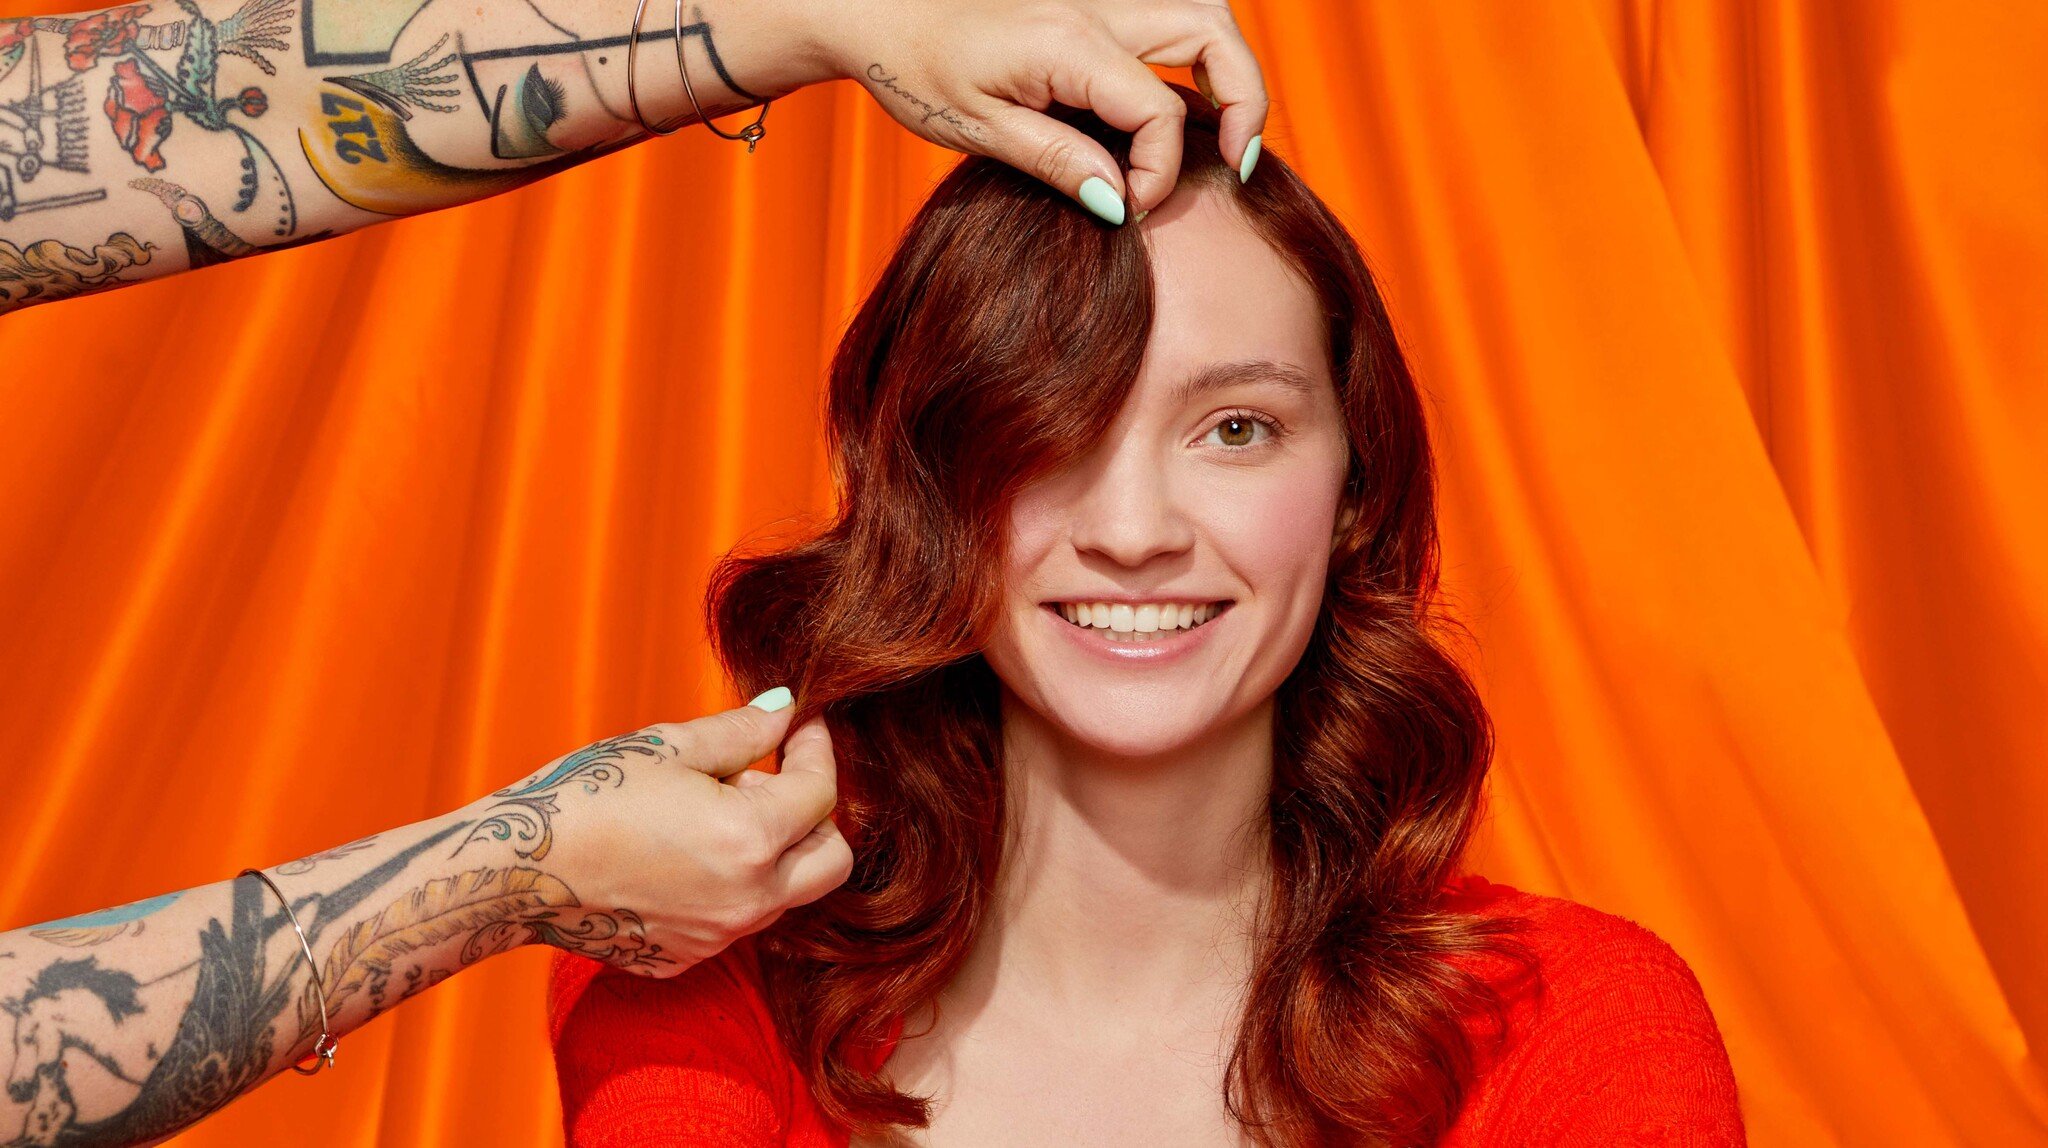 jack of all curls: how to curl your hair